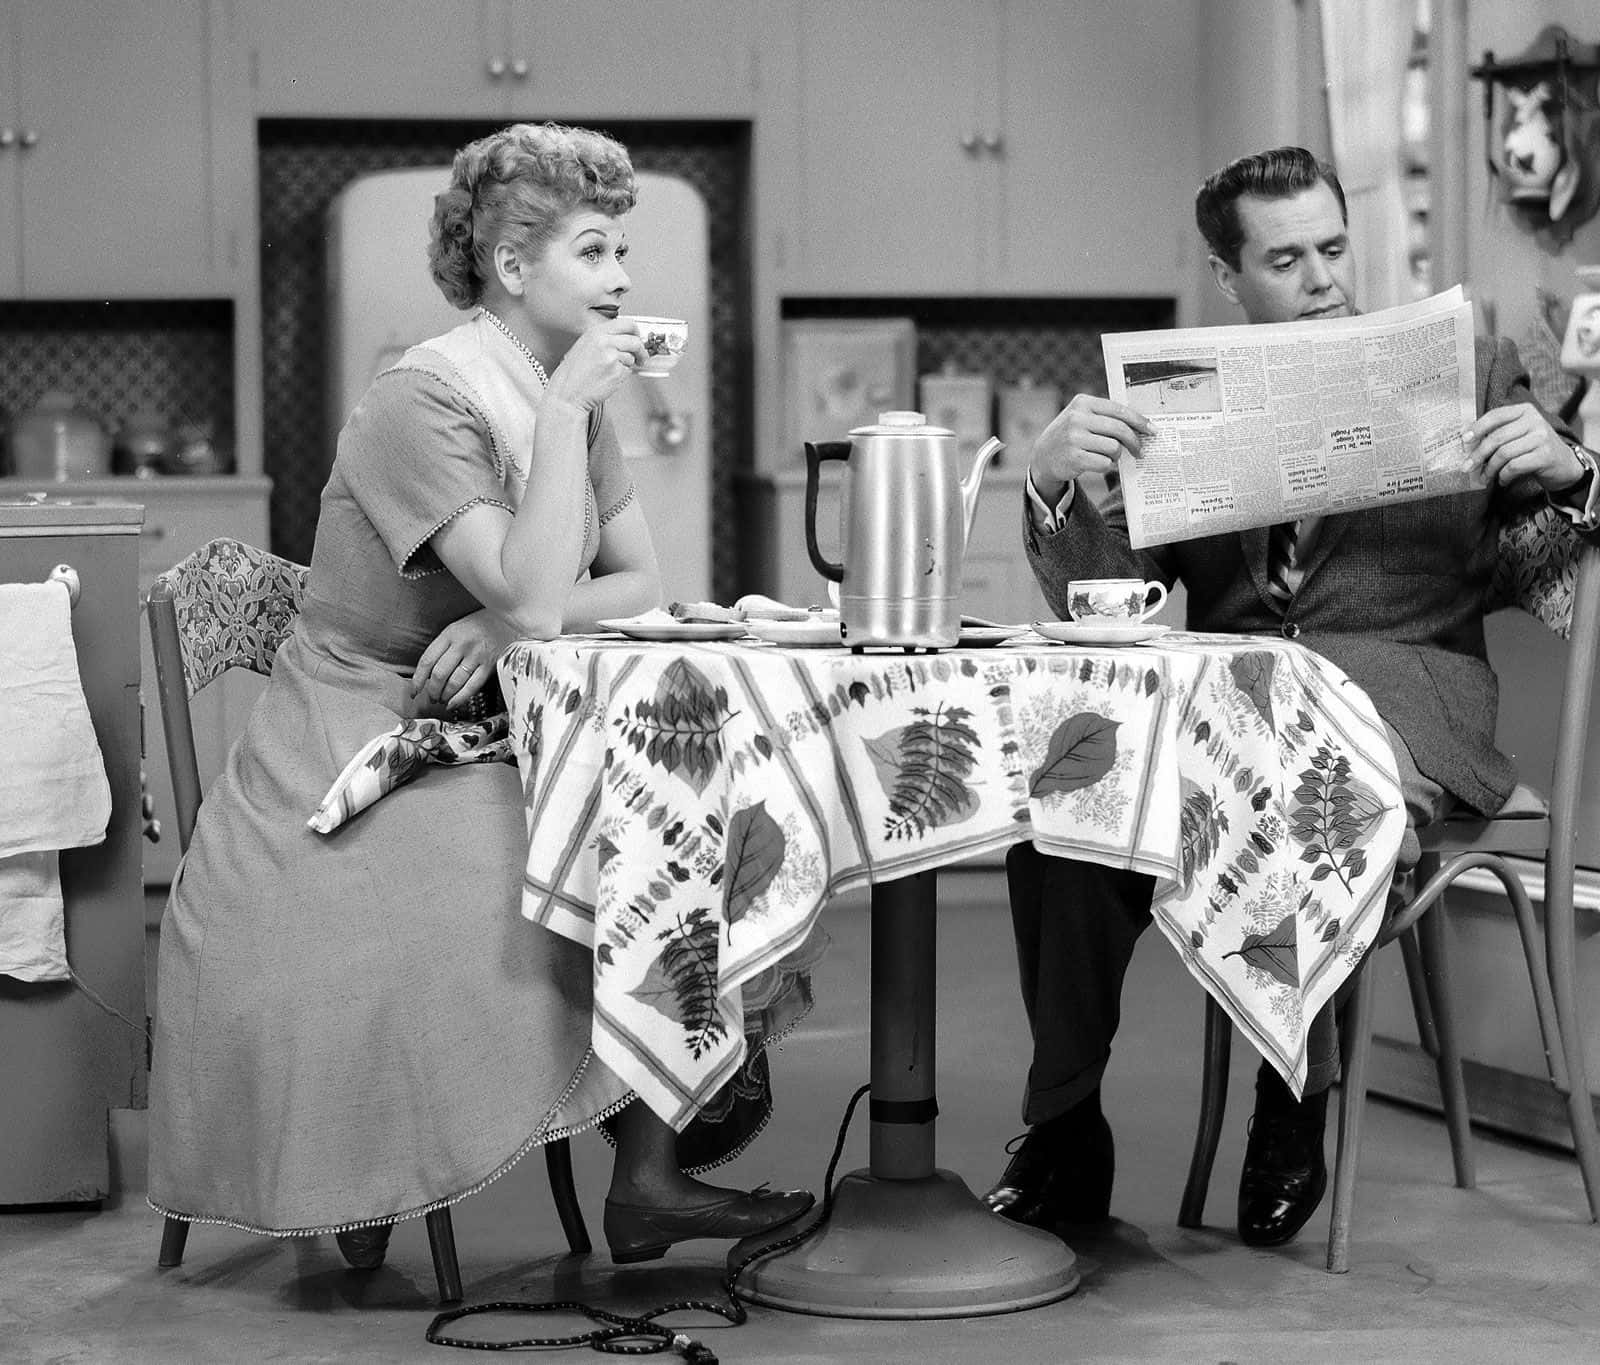 A Man And Woman Sitting At A Table Reading A Newspaper